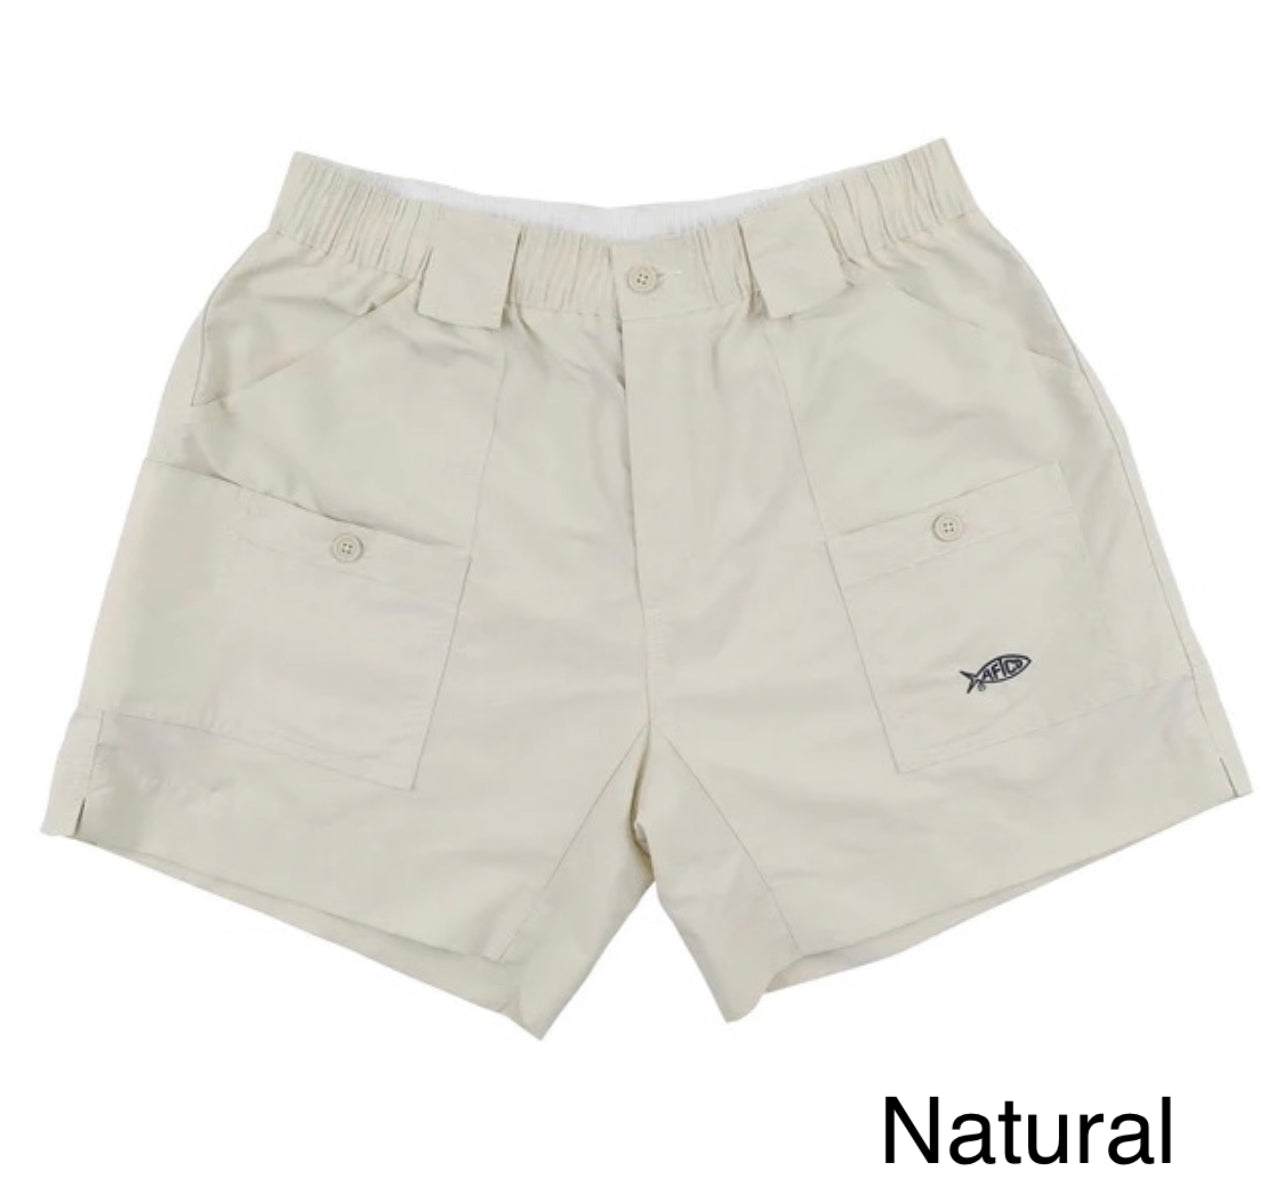 Aftco The Original Fishing Short – Commerce Street Clothing